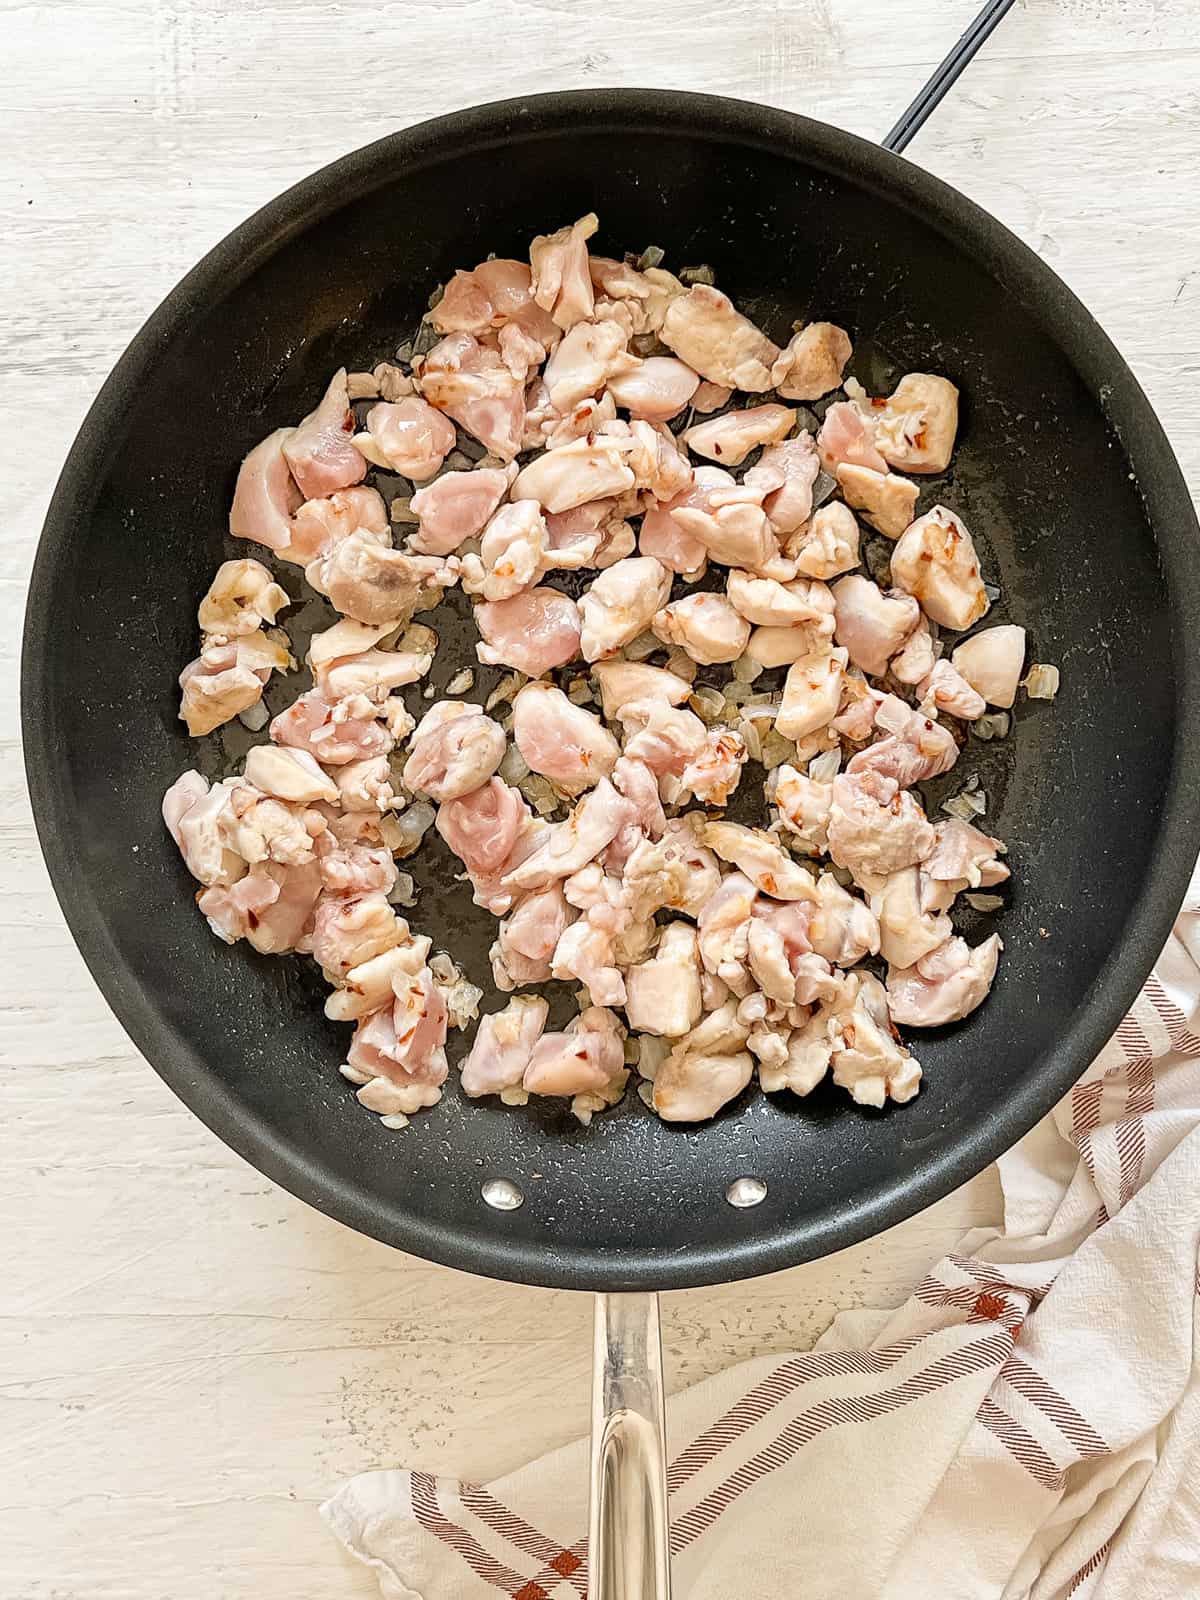 Cut up chicken sauteing with diced onion in a skillet.